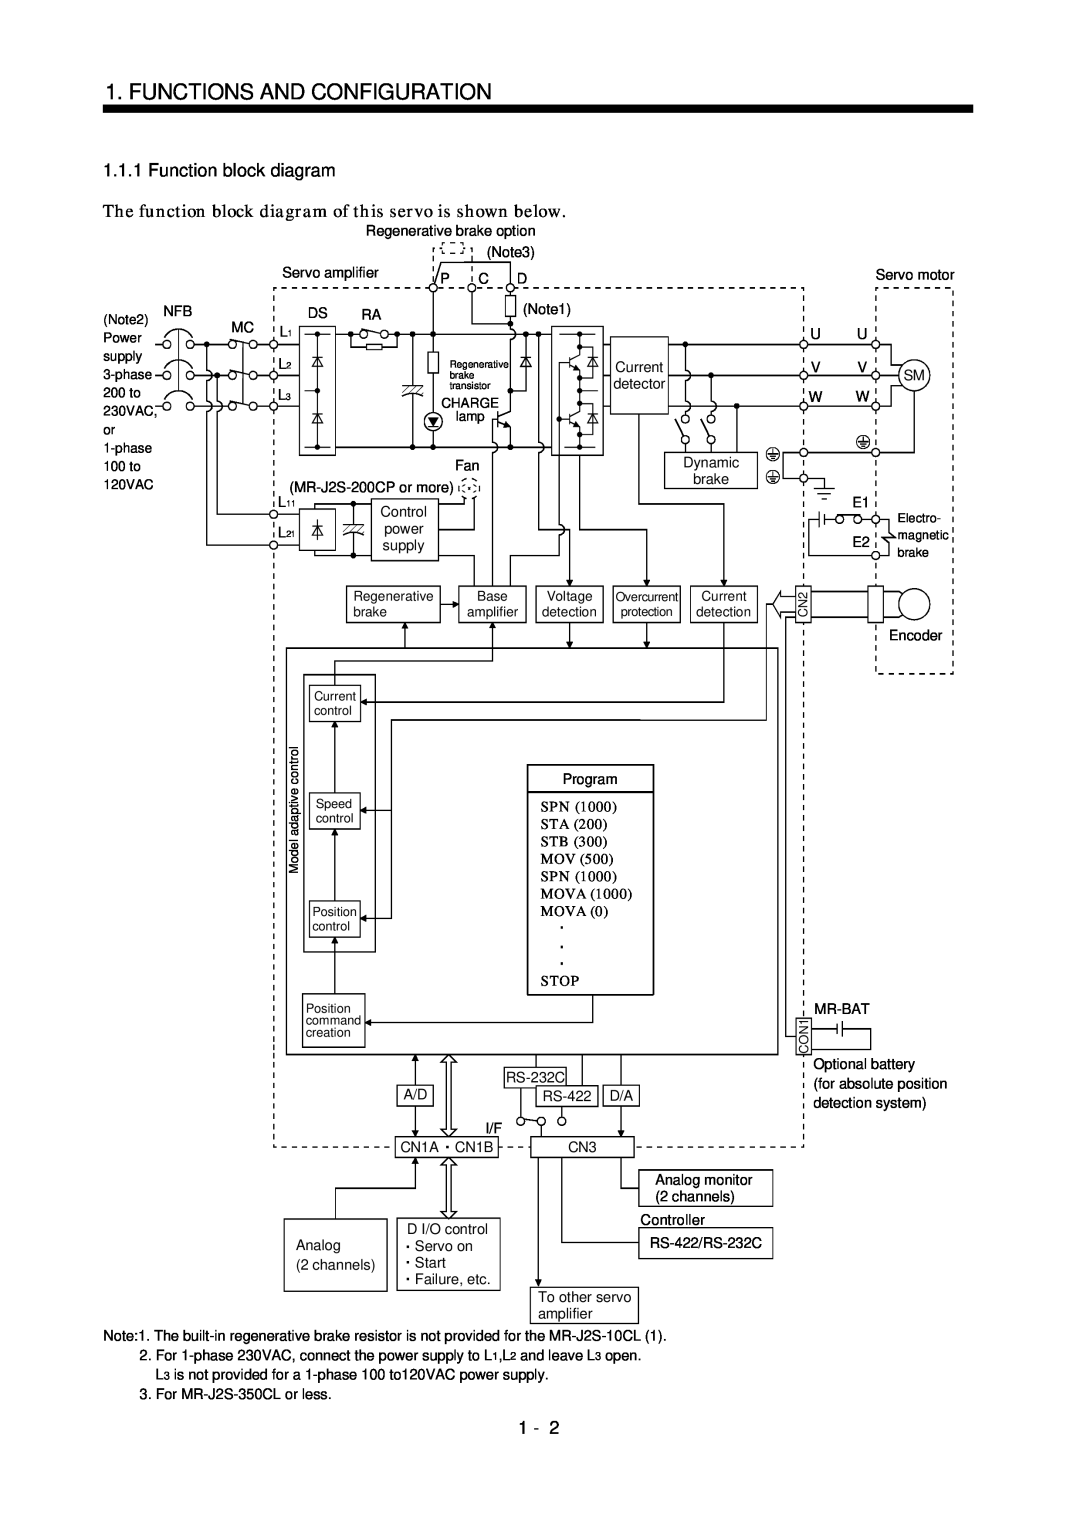 Mitsubishi Electronics MR-J2S- CL specifications Functions And Configuration, Function block diagram 